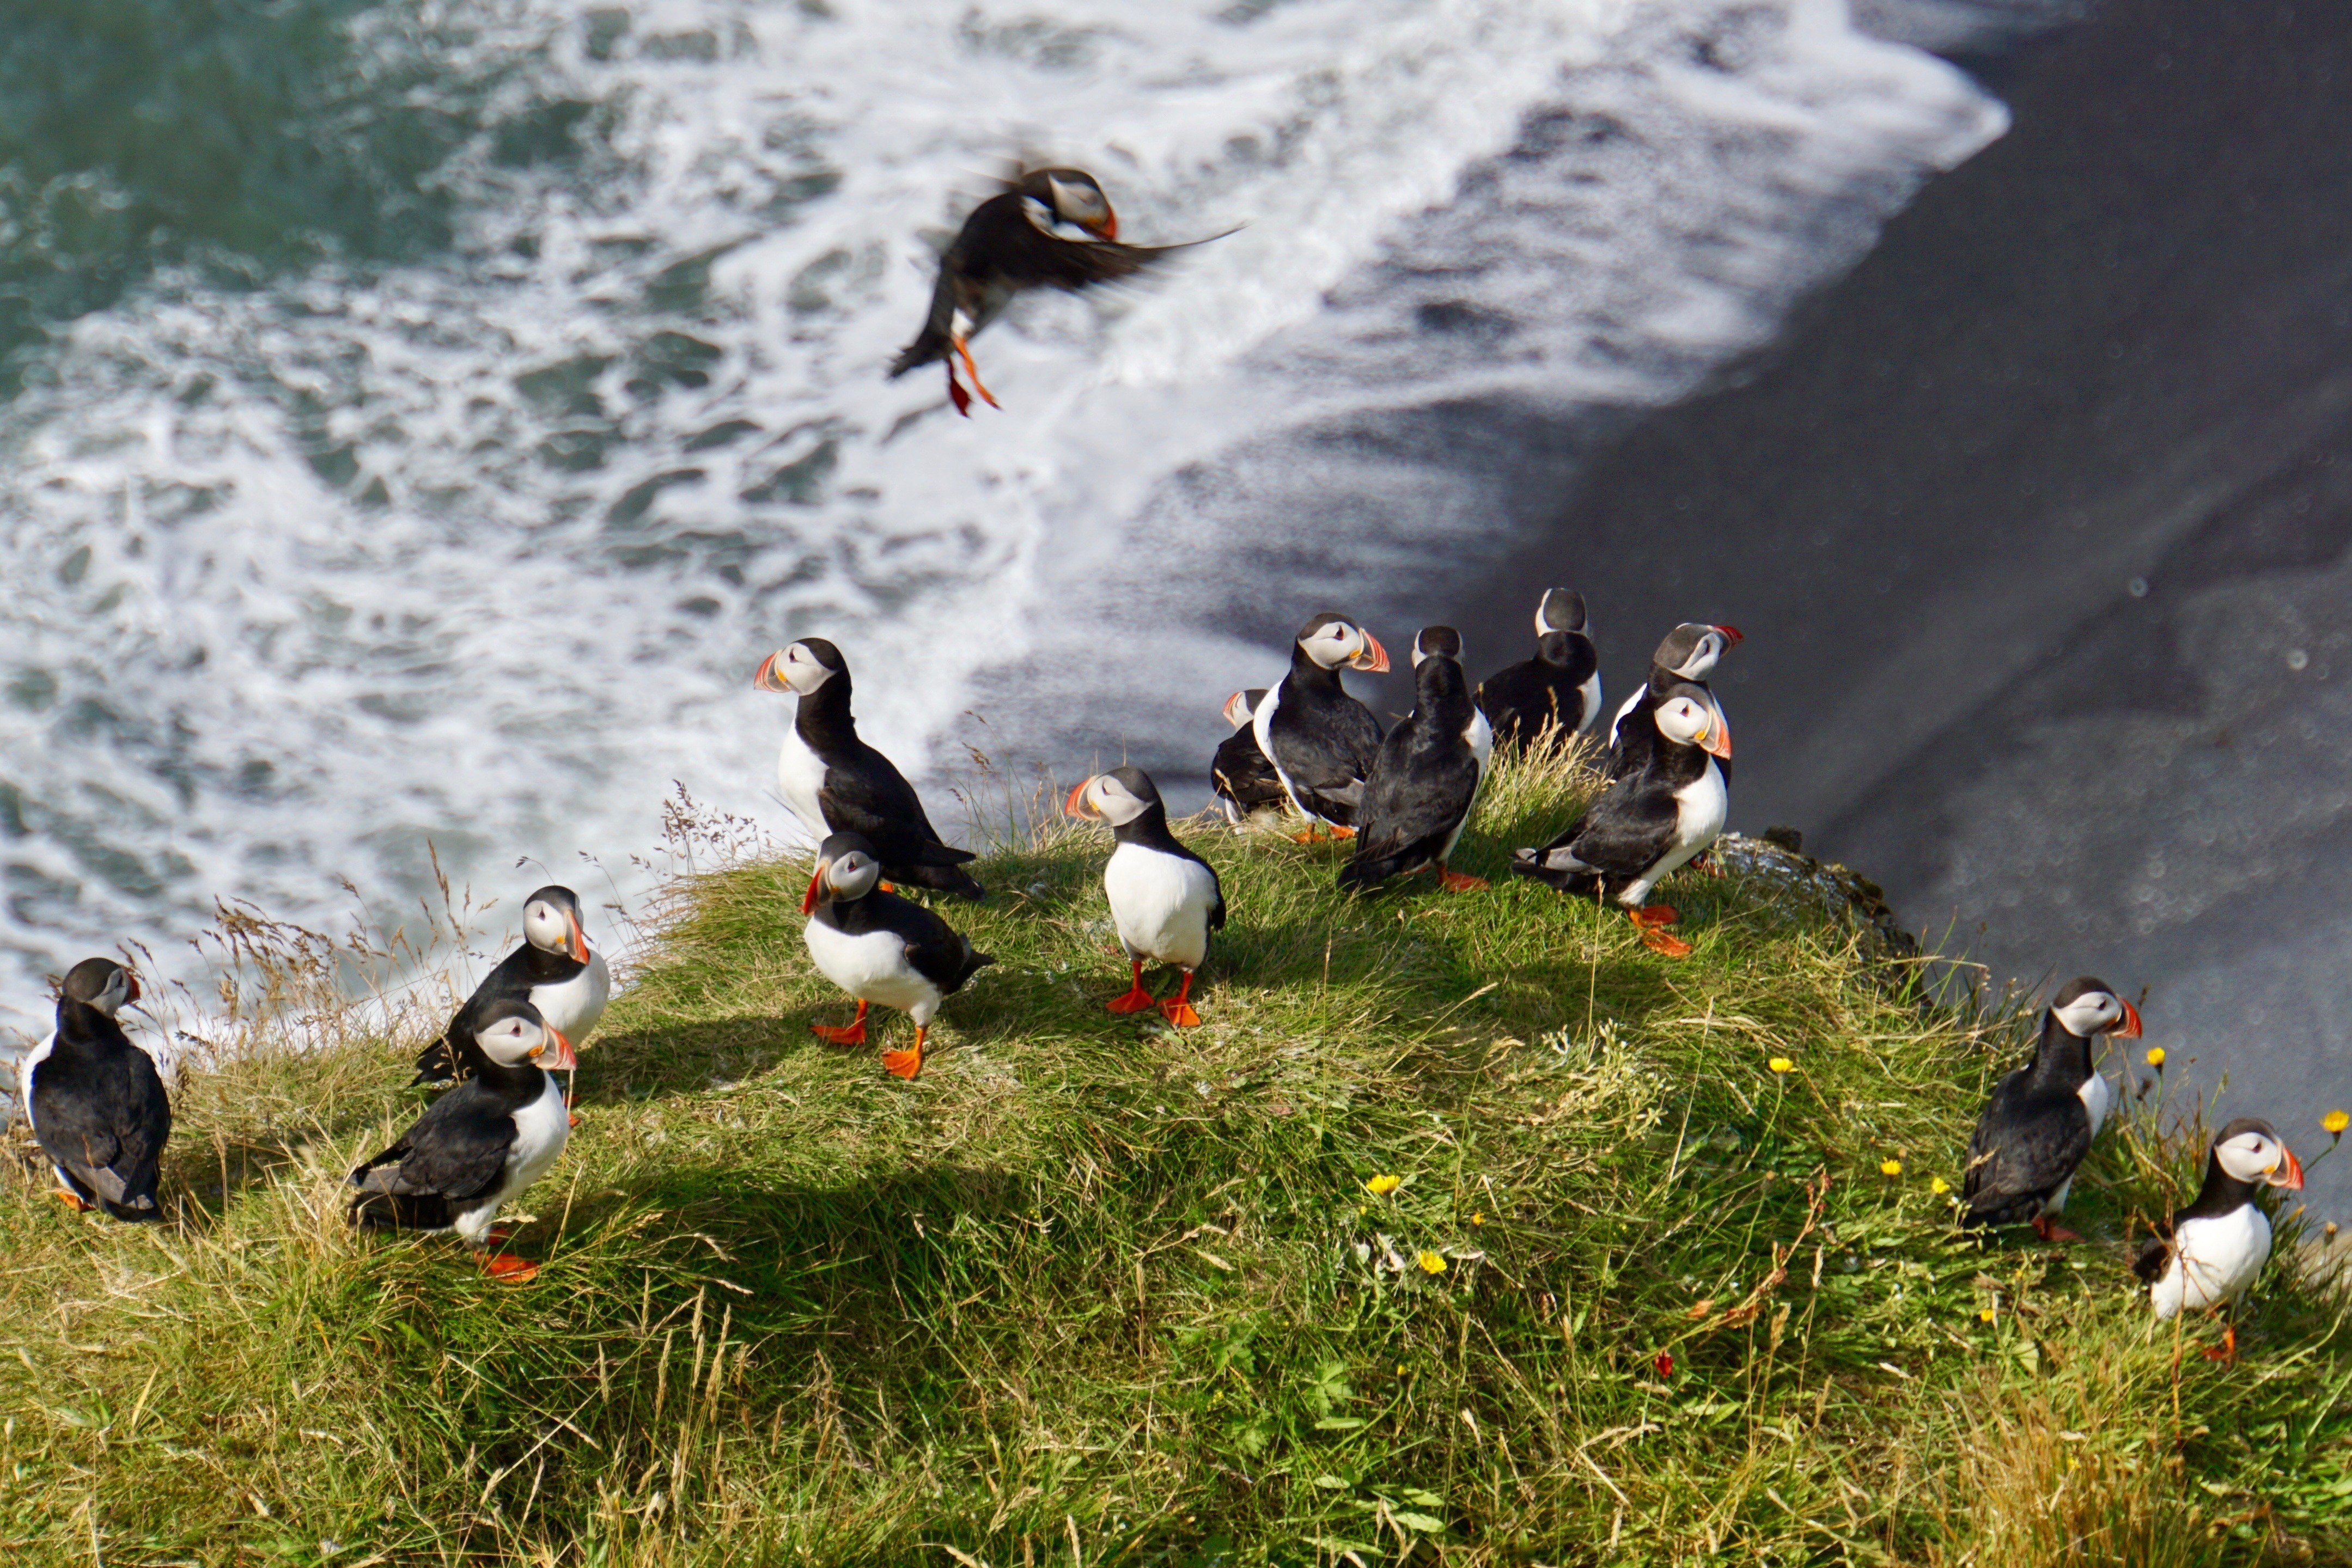 You can ask your personal driver on a custom super jeep tour where the best place is to spot puffins in the summer.